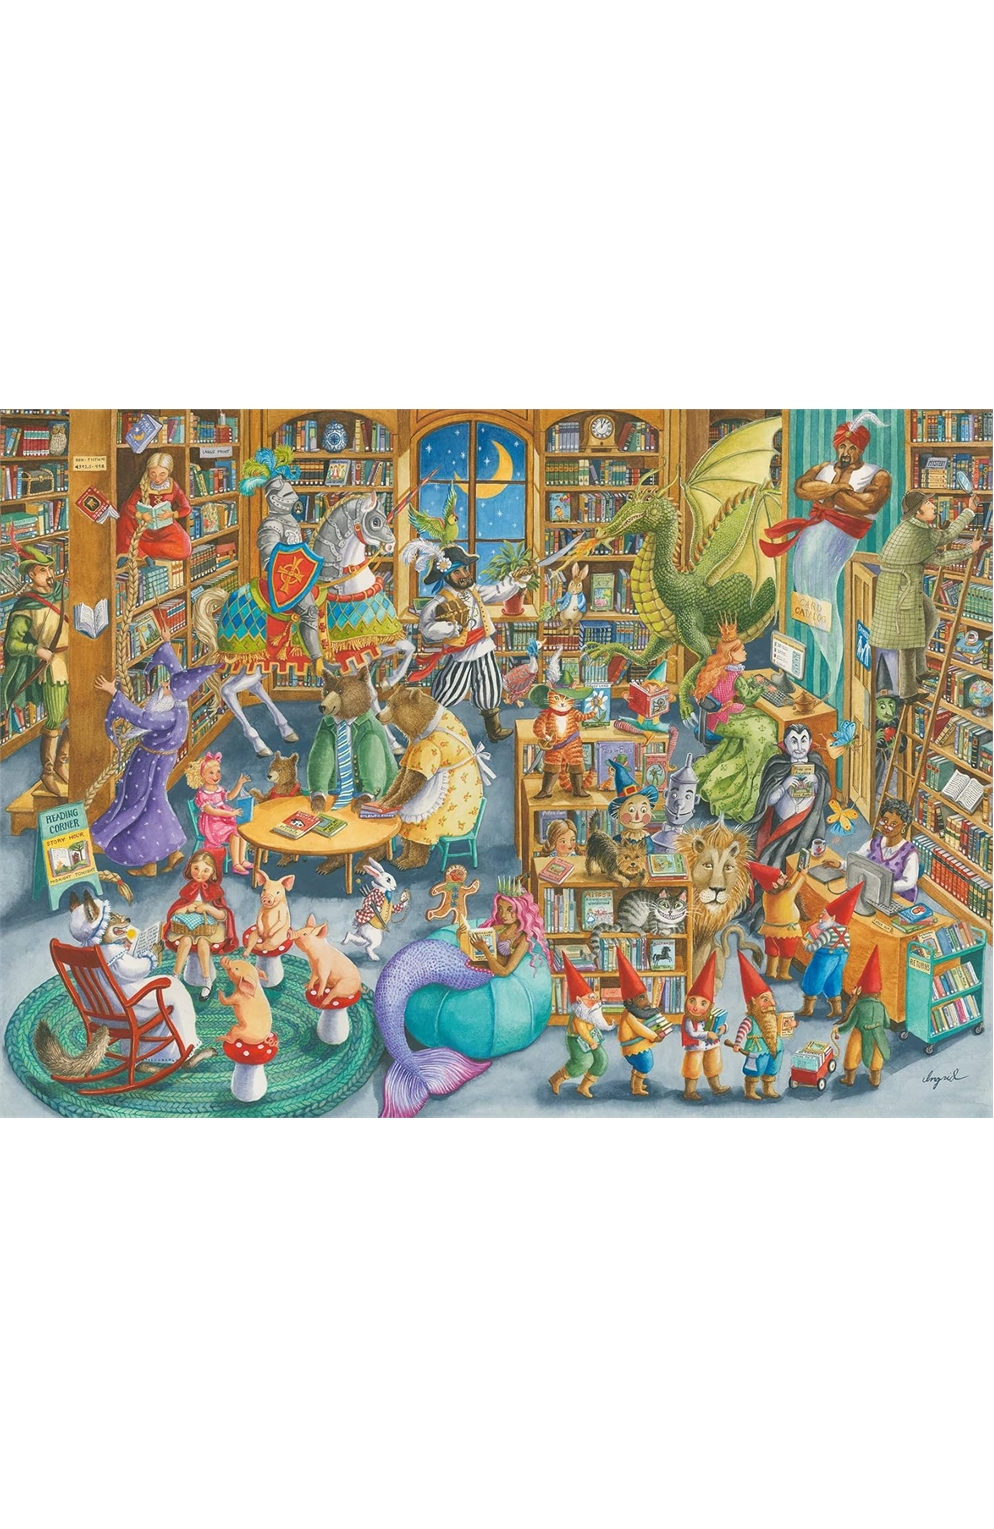 Midnight At The Library - Ravensburger 1000 Piece Puzzle